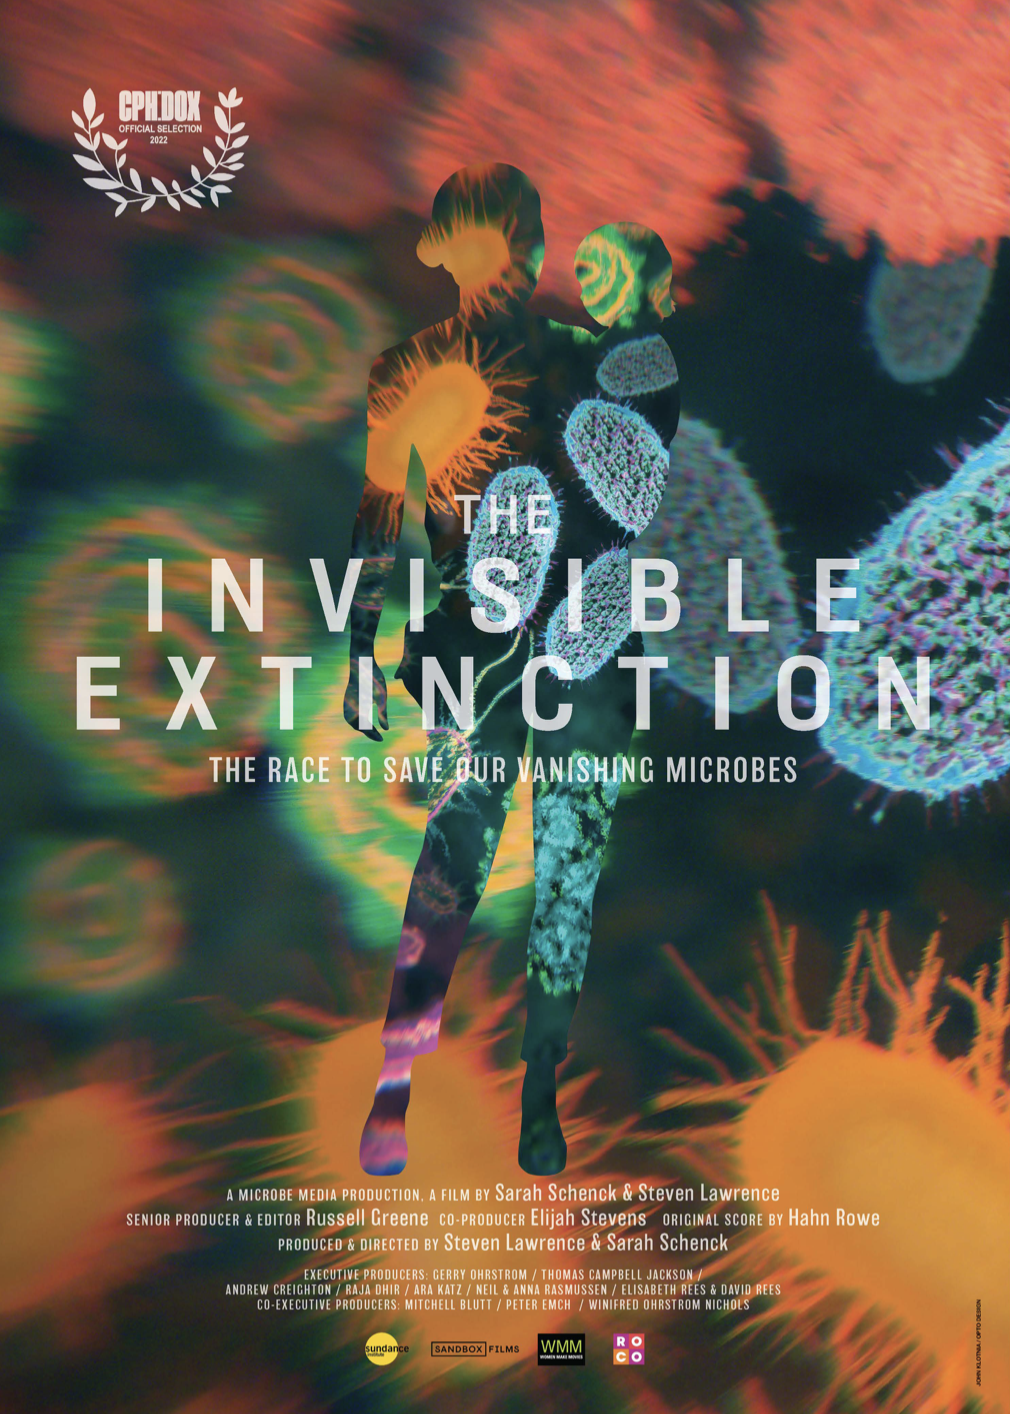 The Invisible Extinction trailer